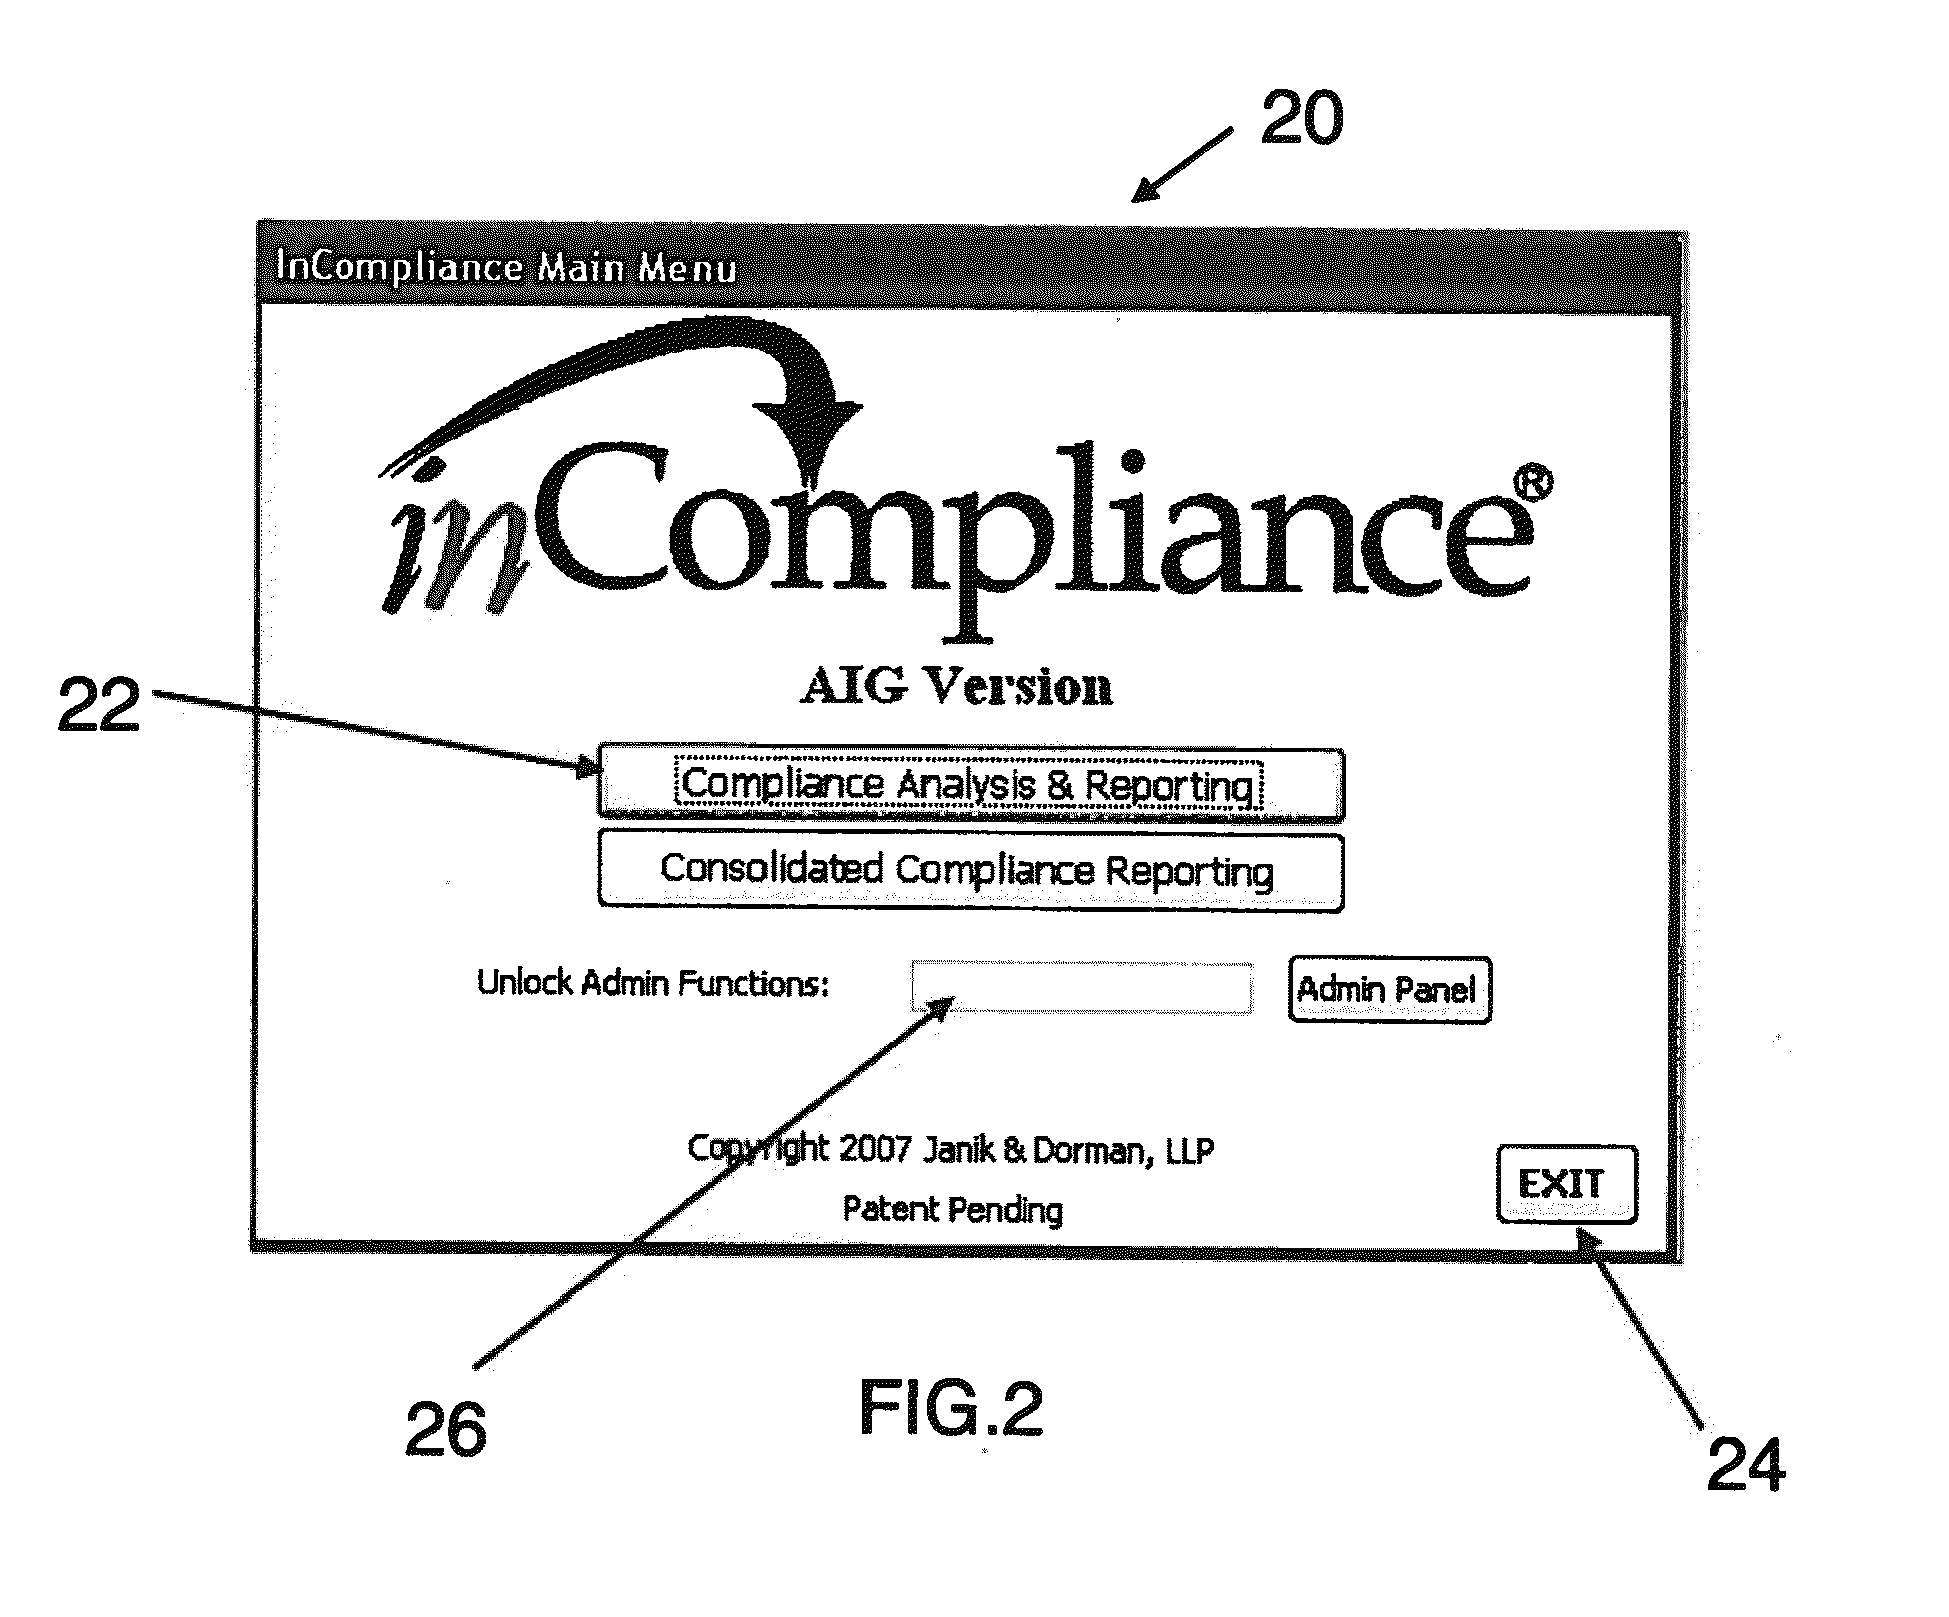 Method for establishing, tracking and auditing compliance